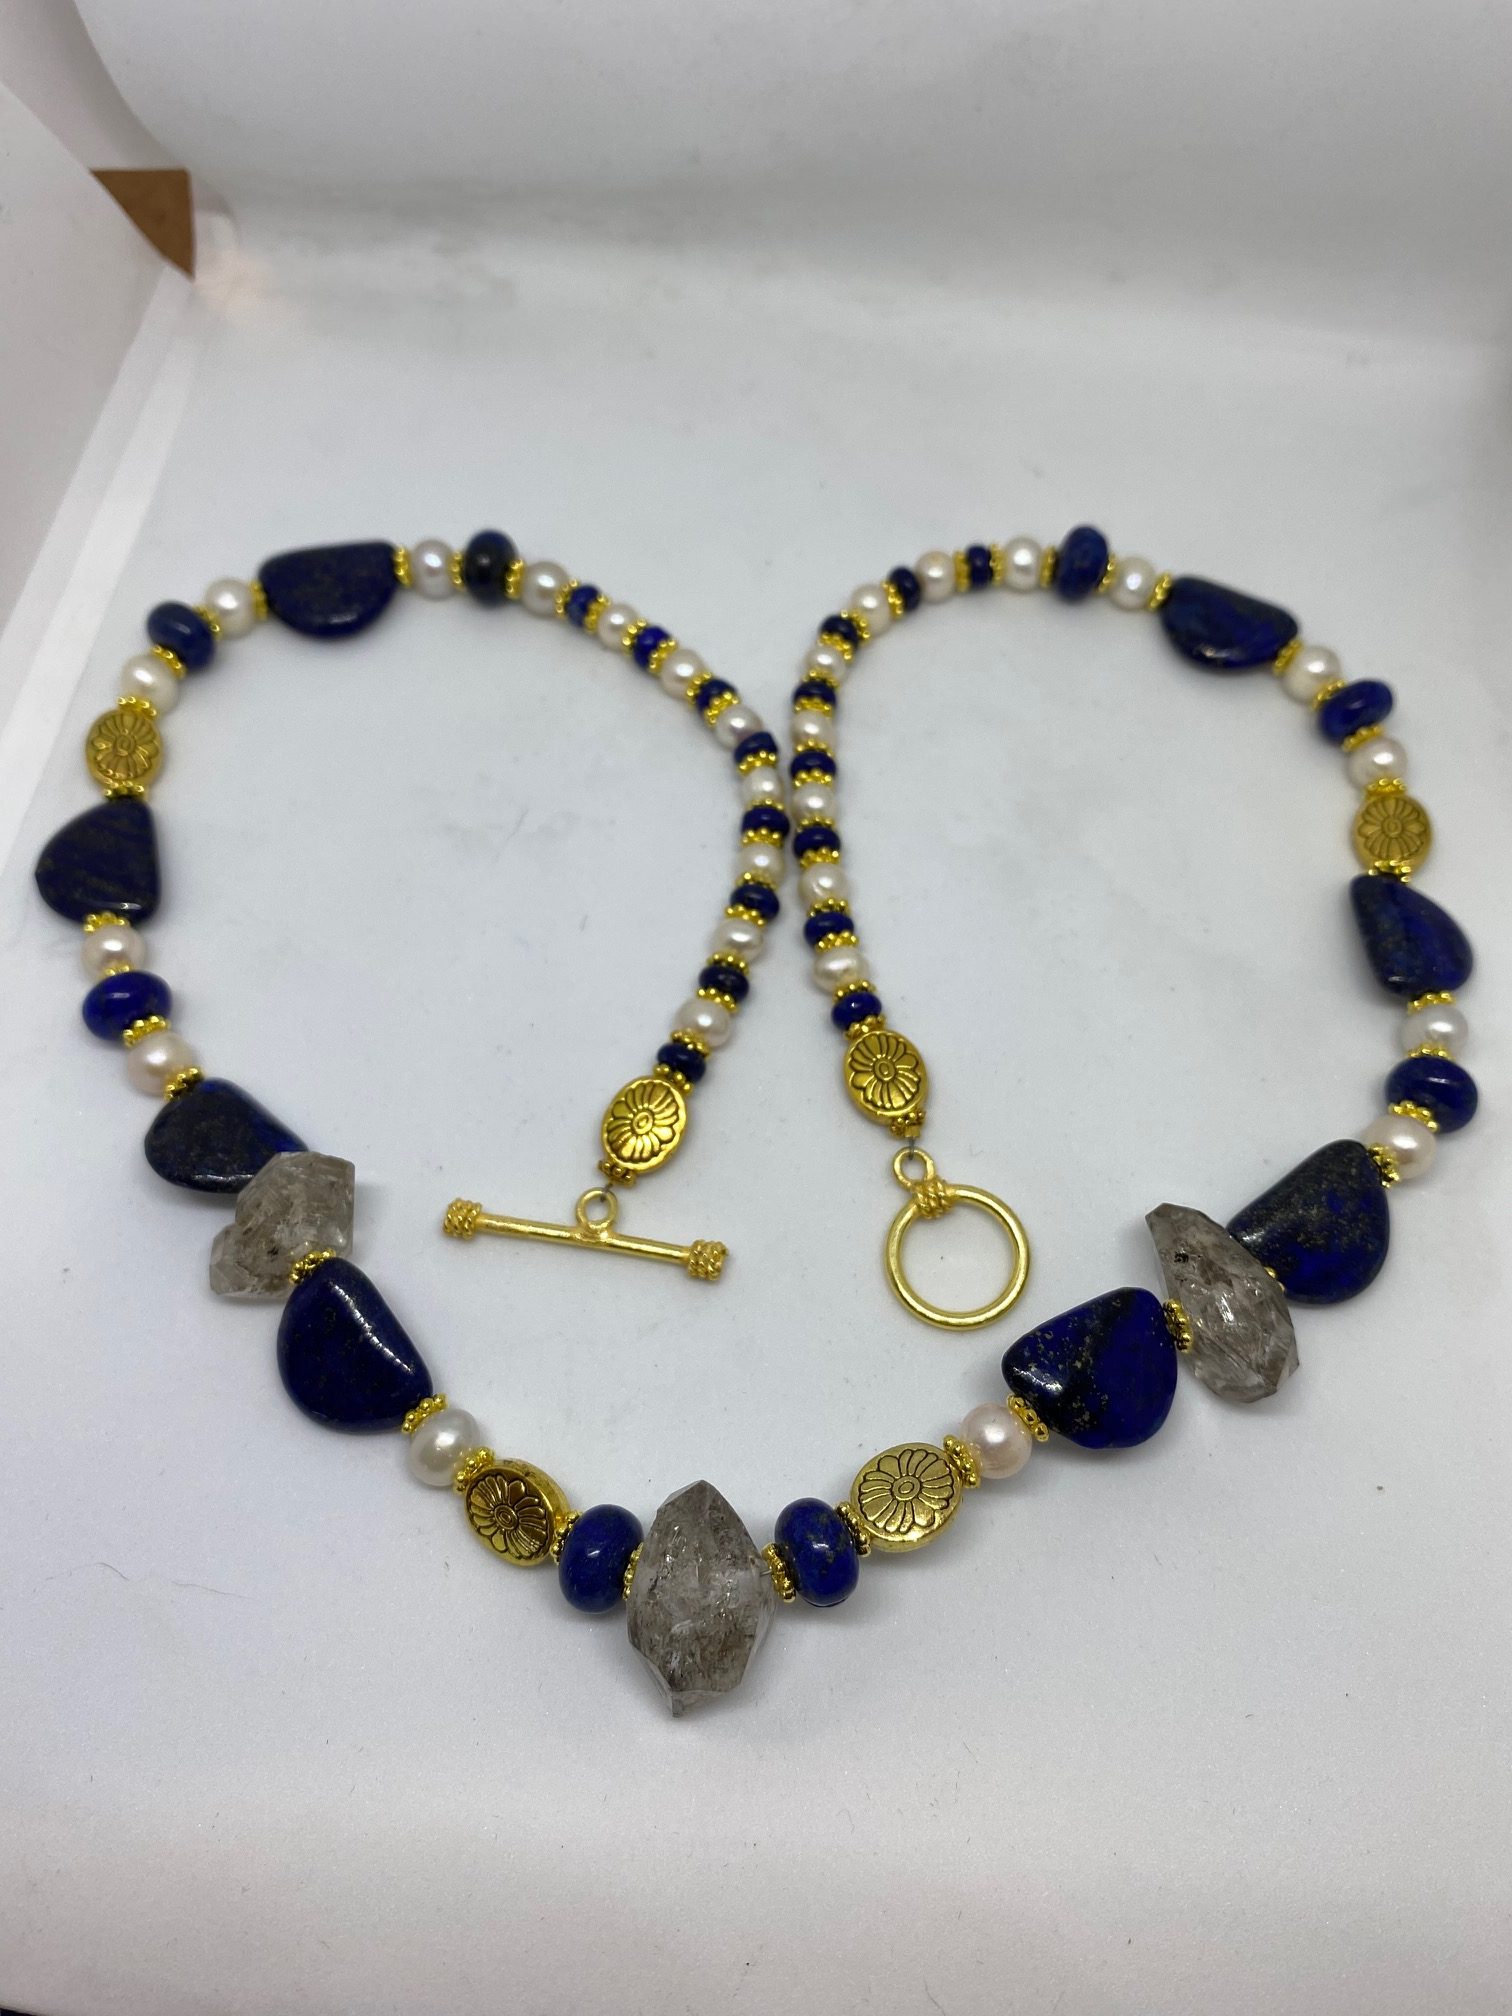 Lapis Lazuli, Pearl and Elestial Quartz Necklace Promotes Manifesting from the Heart.